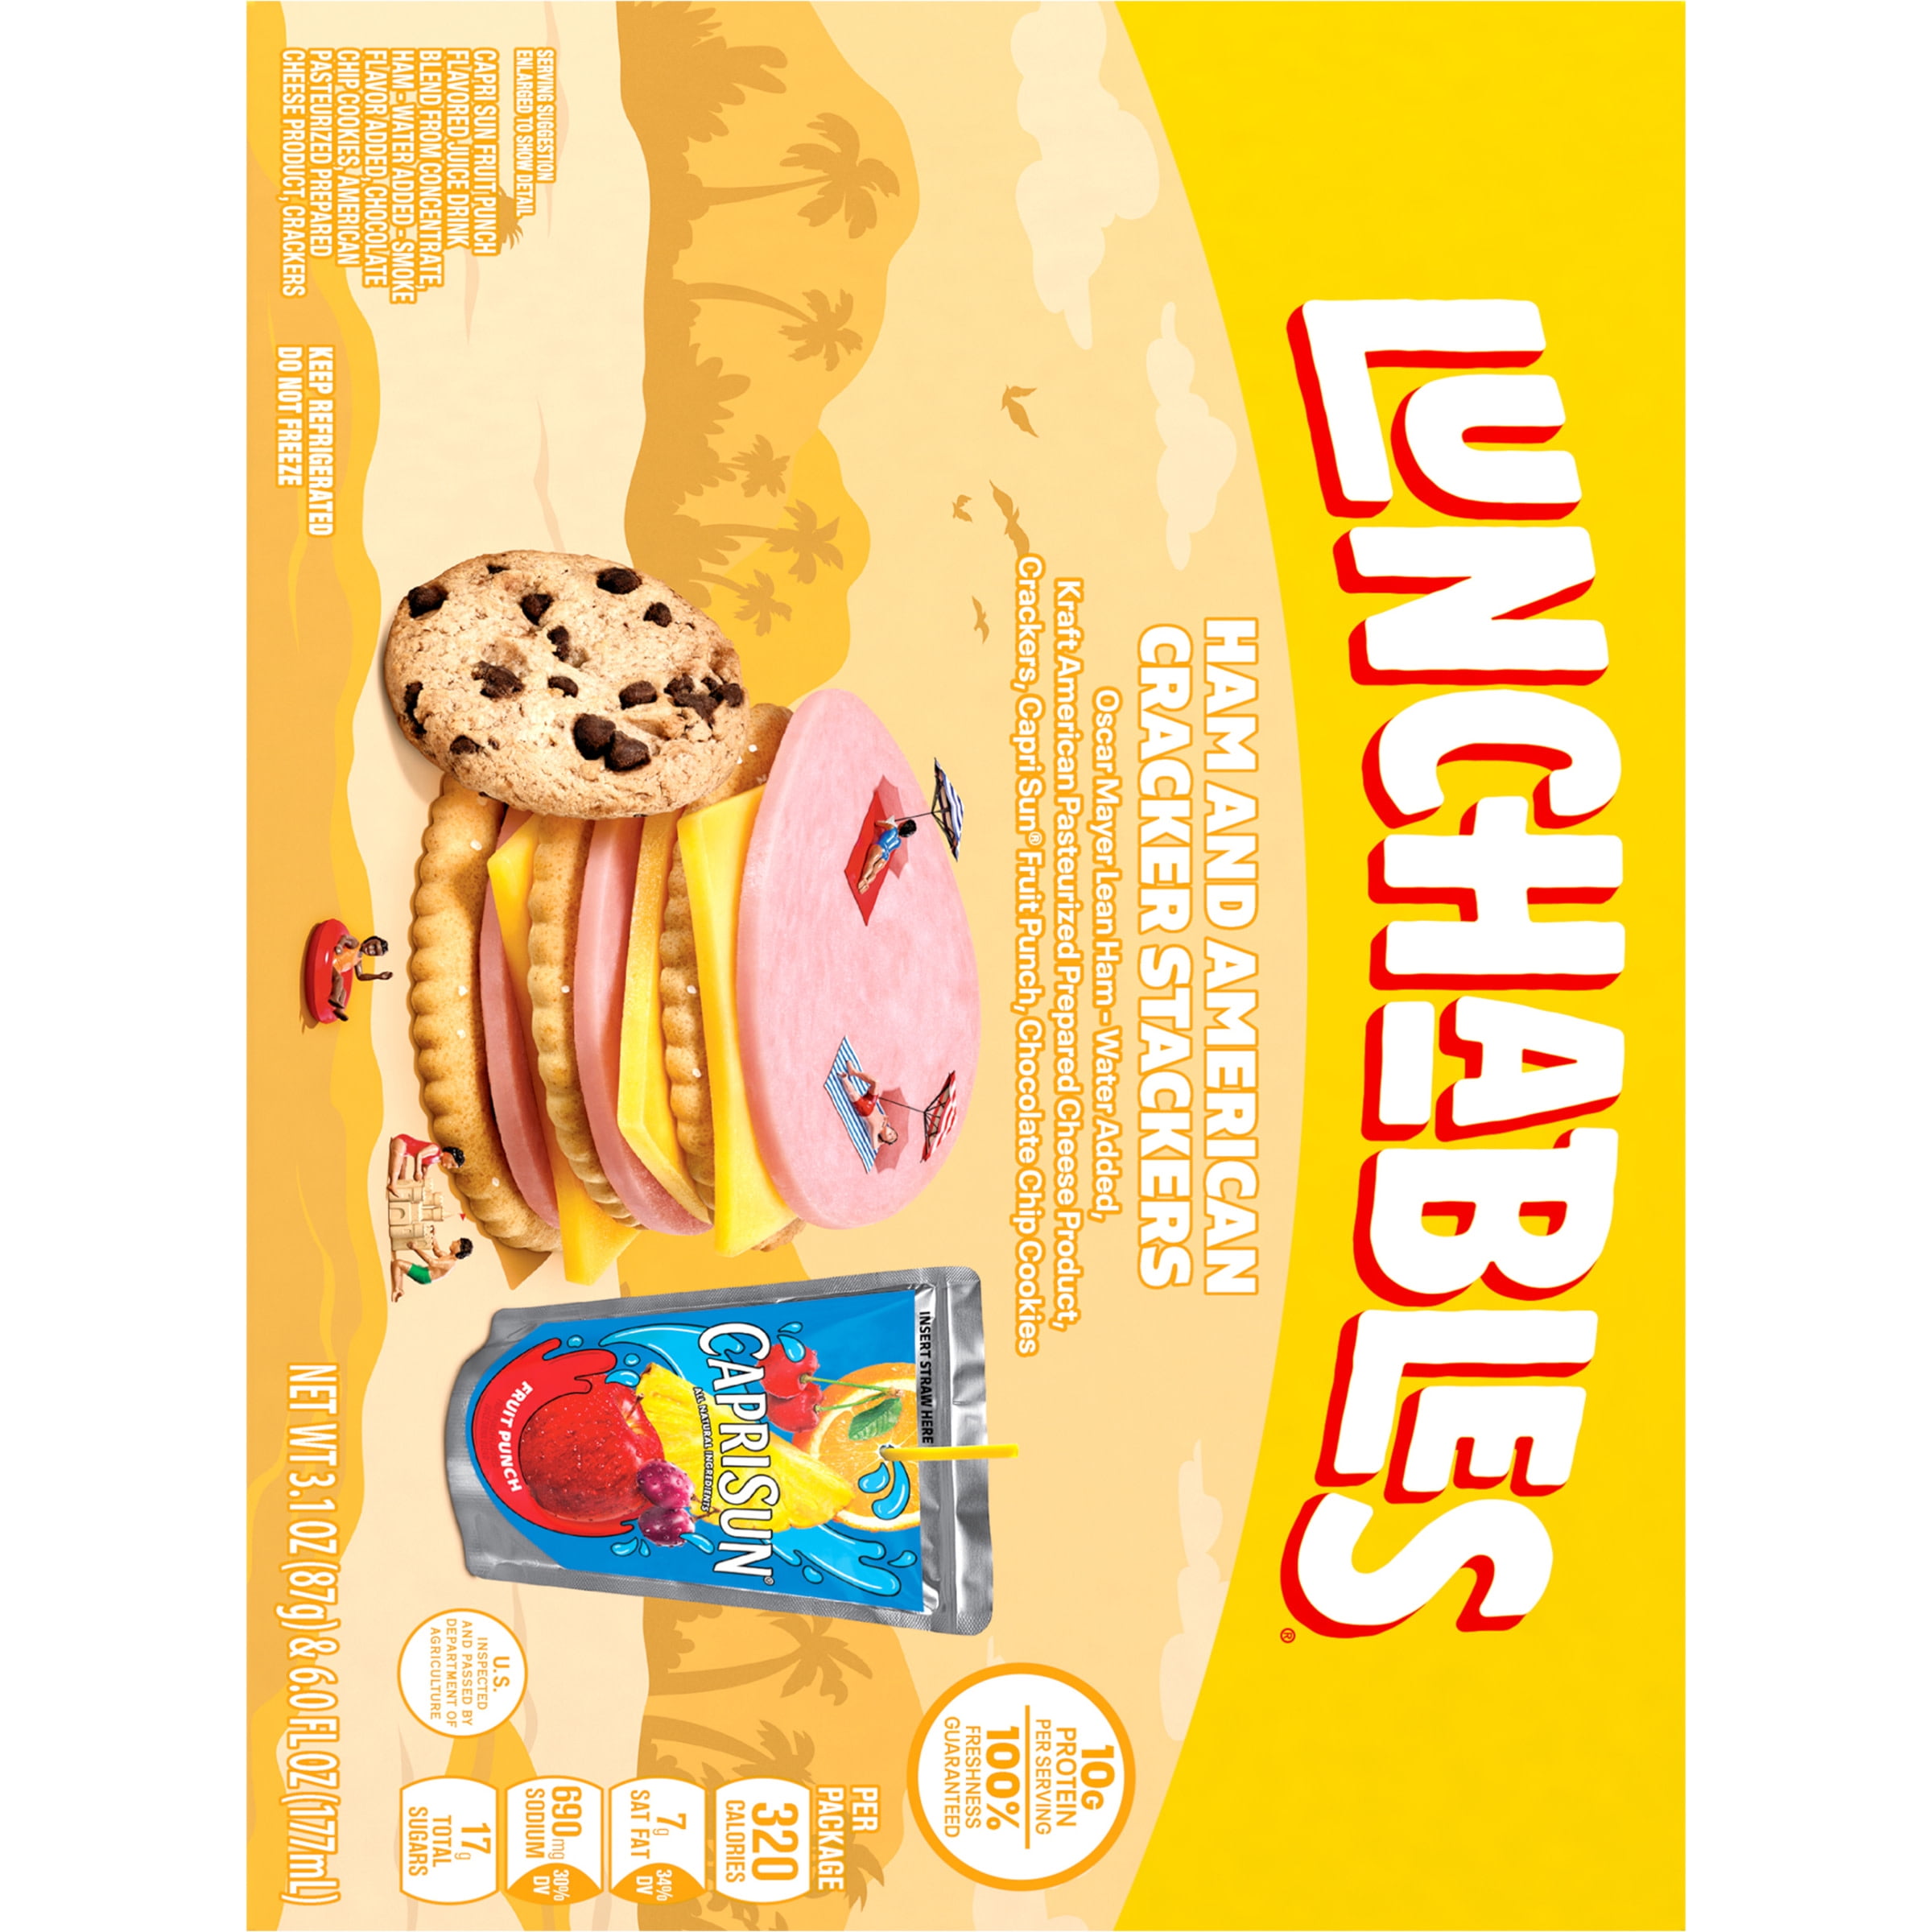 Lunchables Ham & American Cheese Cracker Stacker Kids Lunch Meal Kit, 9.1  oz - Foods Co.